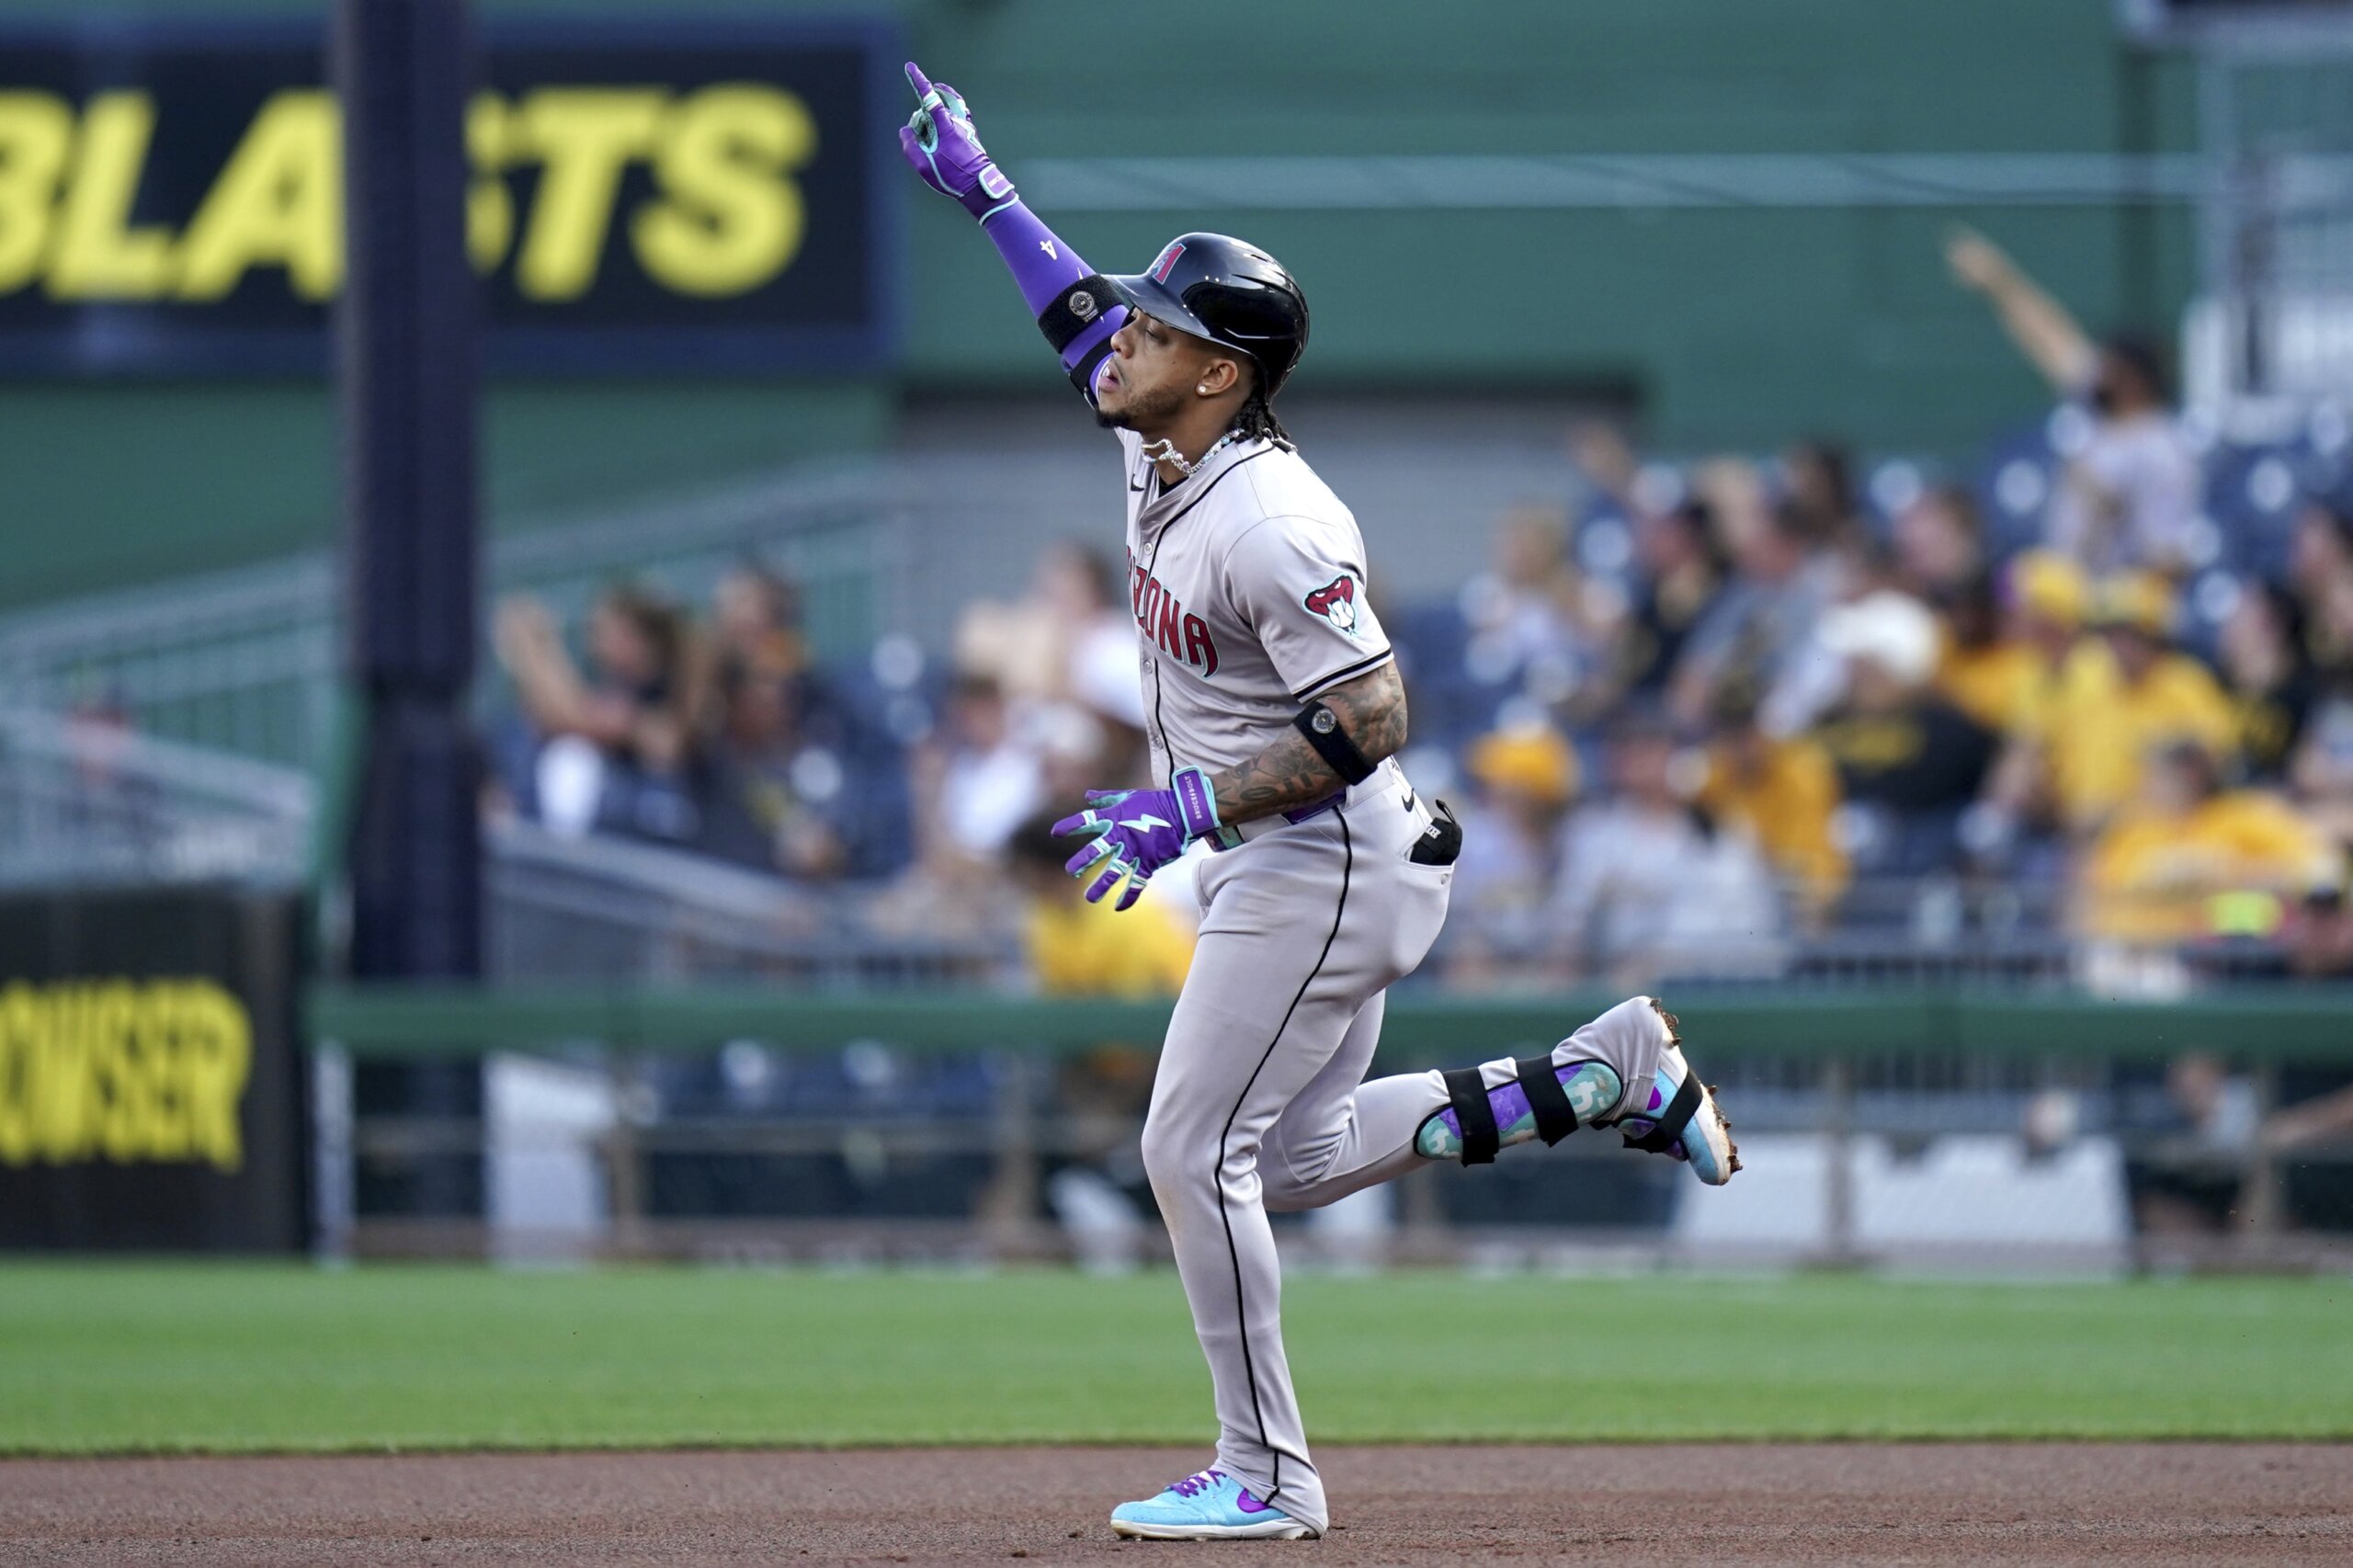 Marte, Pederson, newcomer Bell hit consecutive 1st-inning HRs for Diamondbacks in Pittsburgh – WTOP News